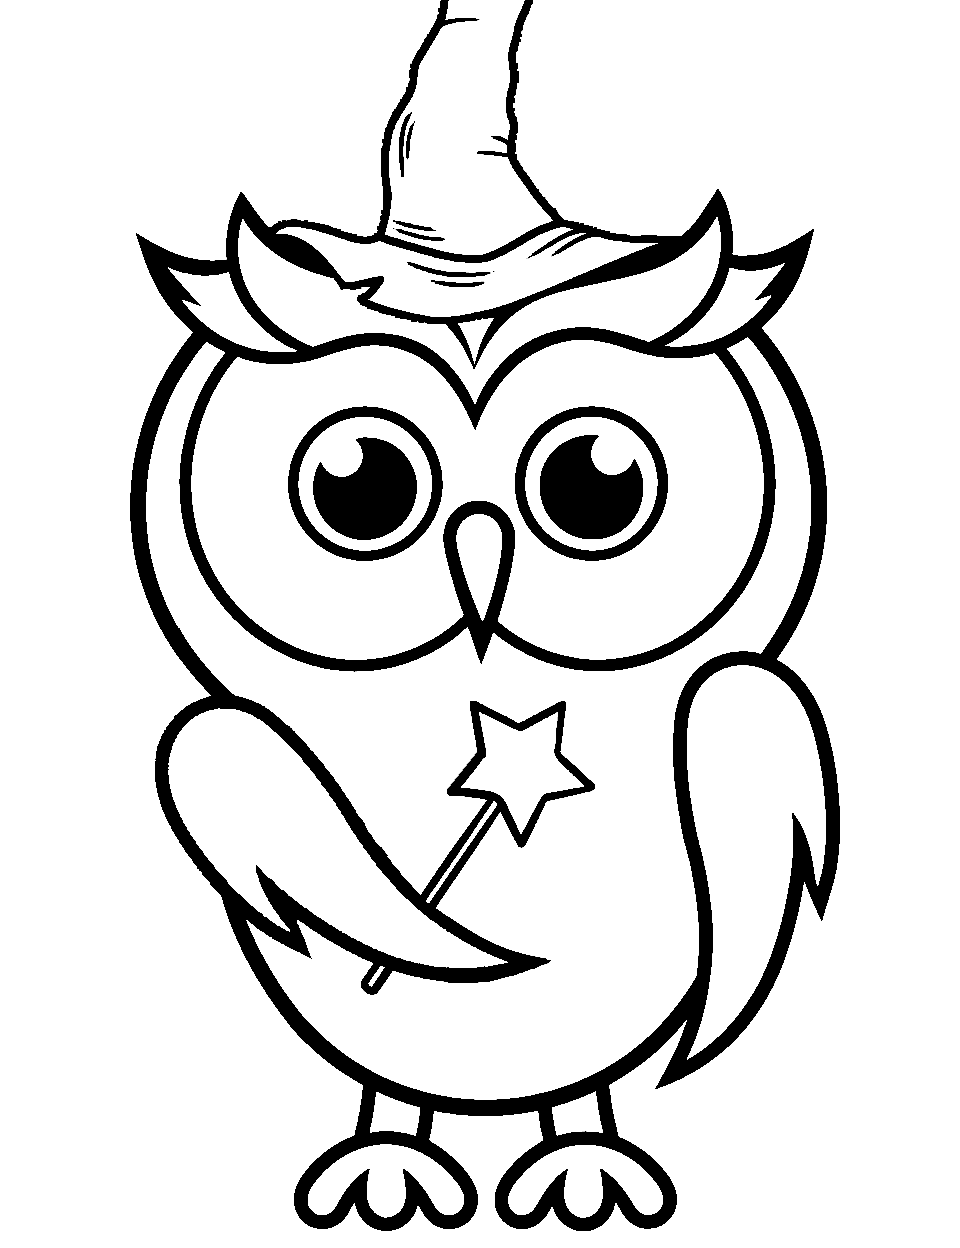 Owl with a Magic Wand Coloring Page - A mystical owl holding a magic wand.